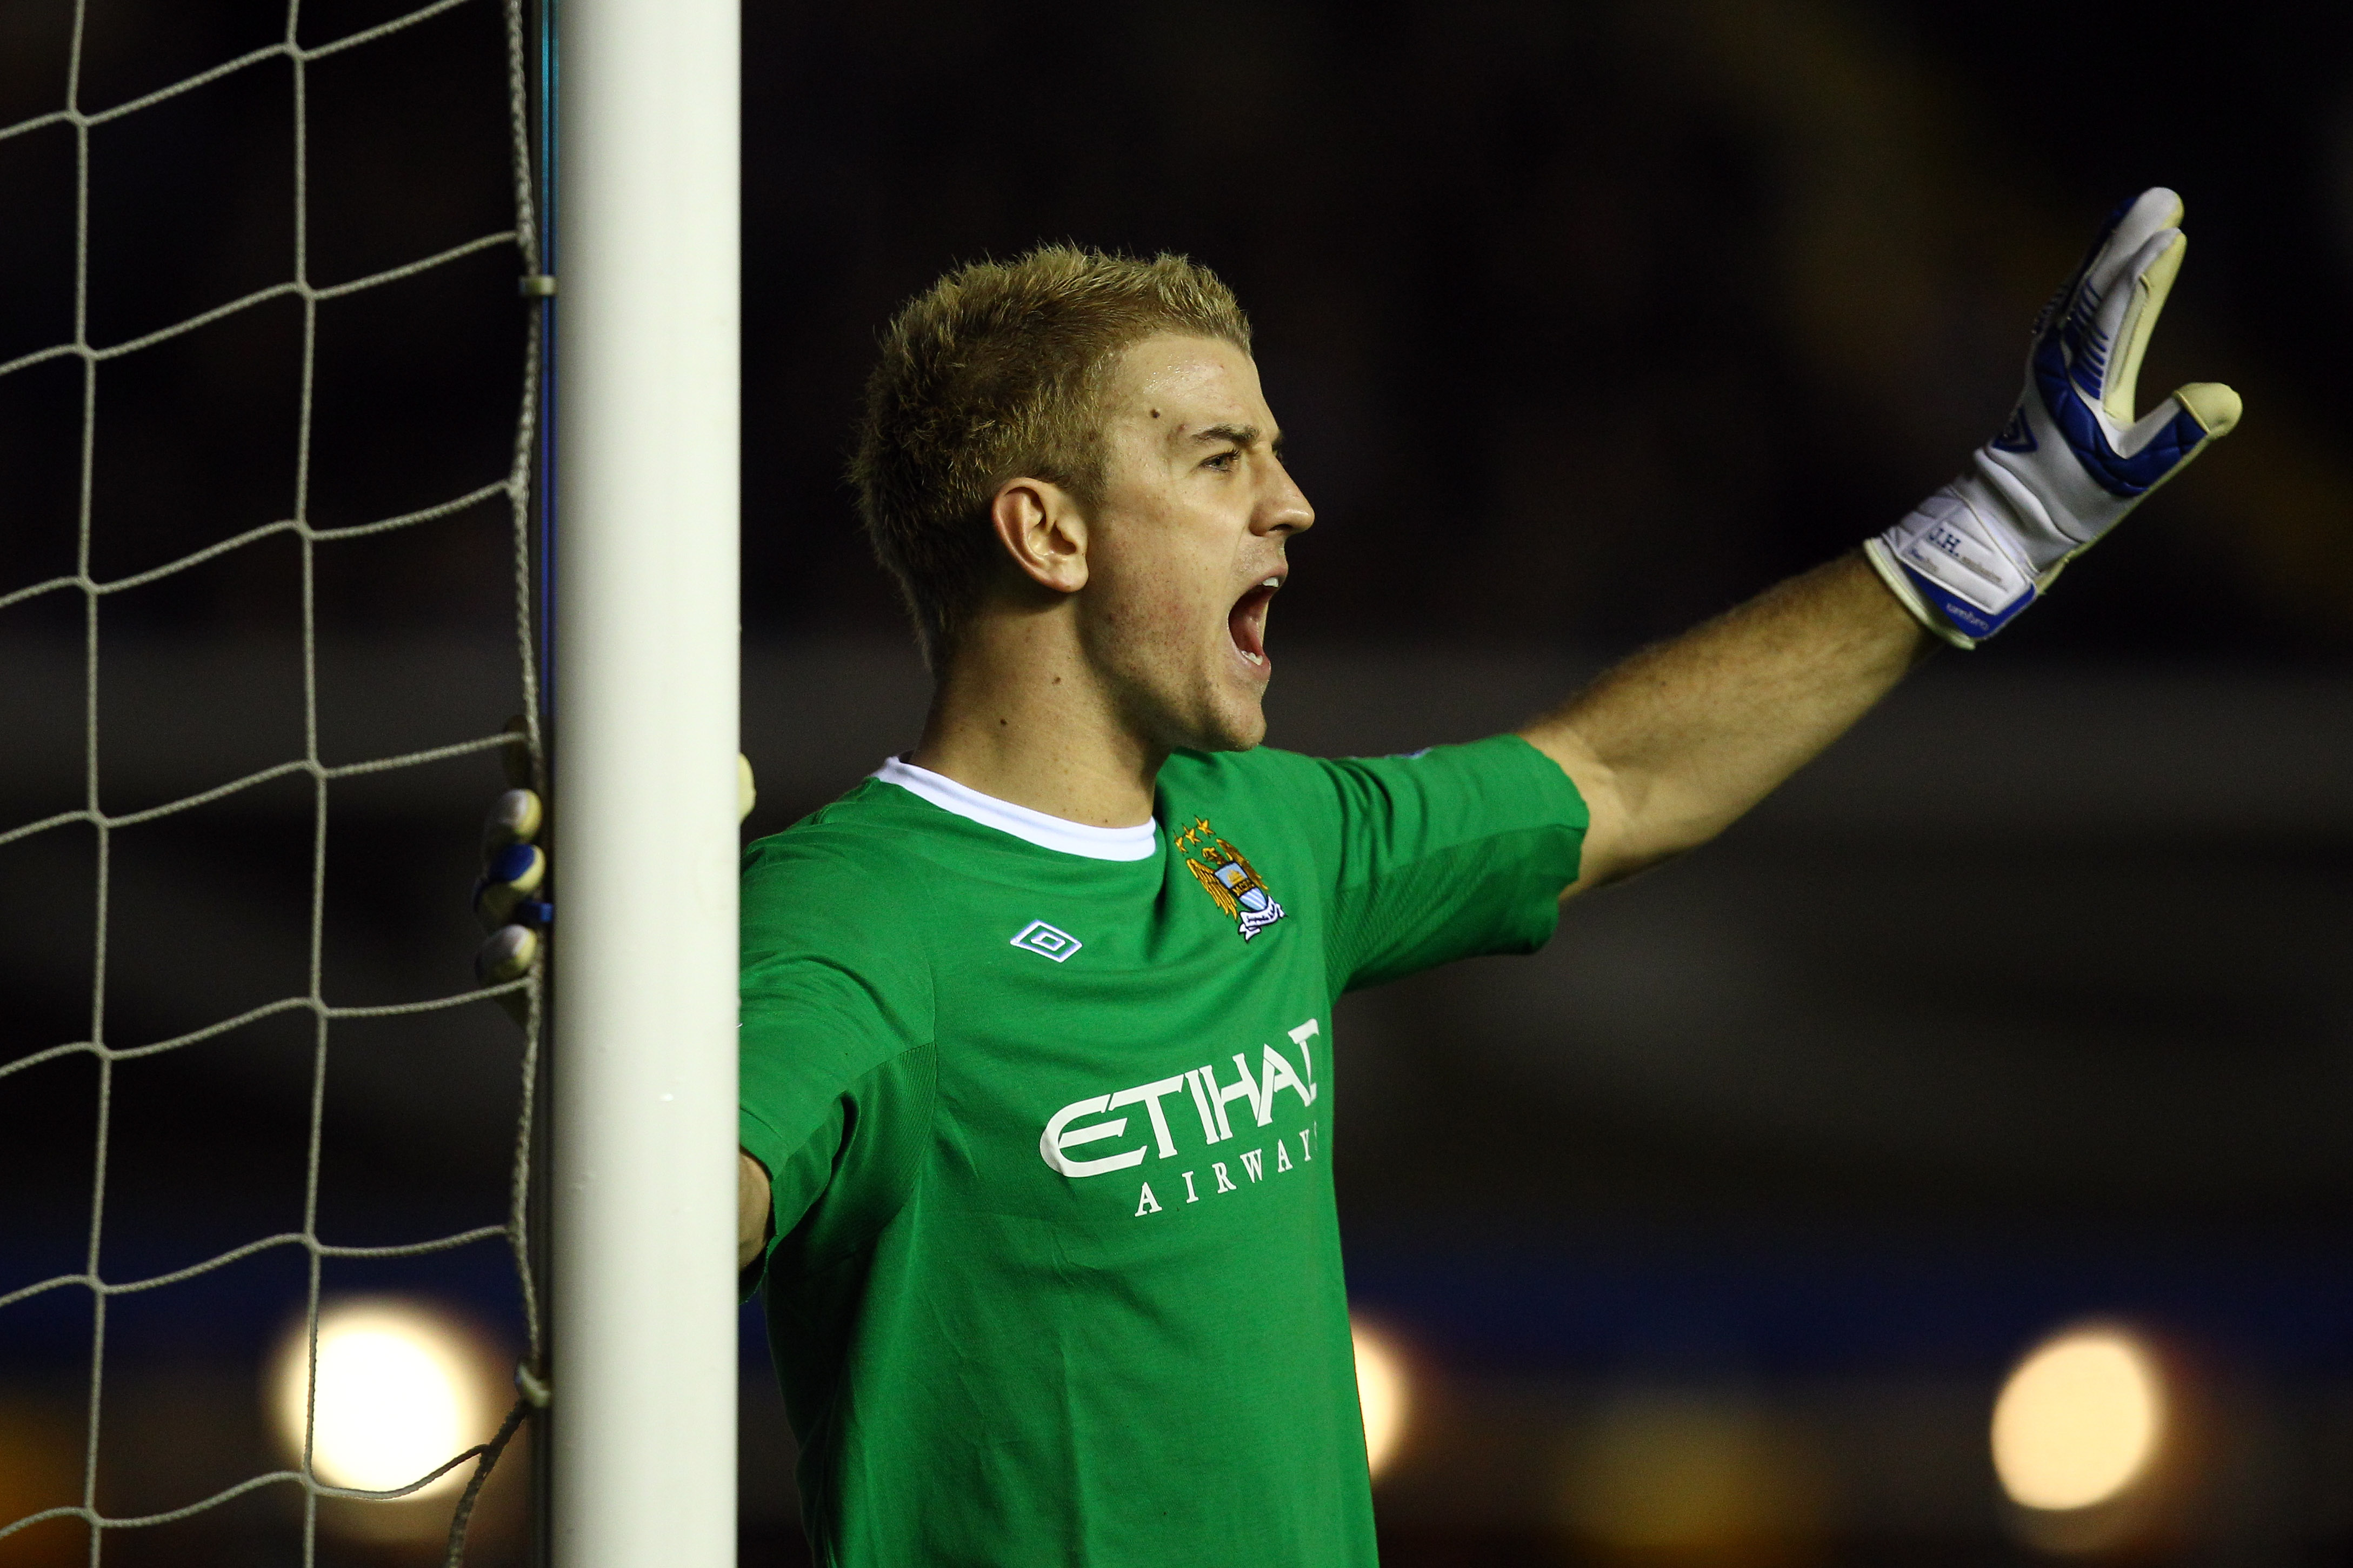 BIRMINGHAM, ENGLAND - FEBRUARY 02:  Joe Hart of Manchester City in action during the Barclays premier league match between Birmingham City and Manchester City at St Andrews on February 2, 2011 in Birmingham, England.  (Photo by Richard Heathcote/Getty Ima